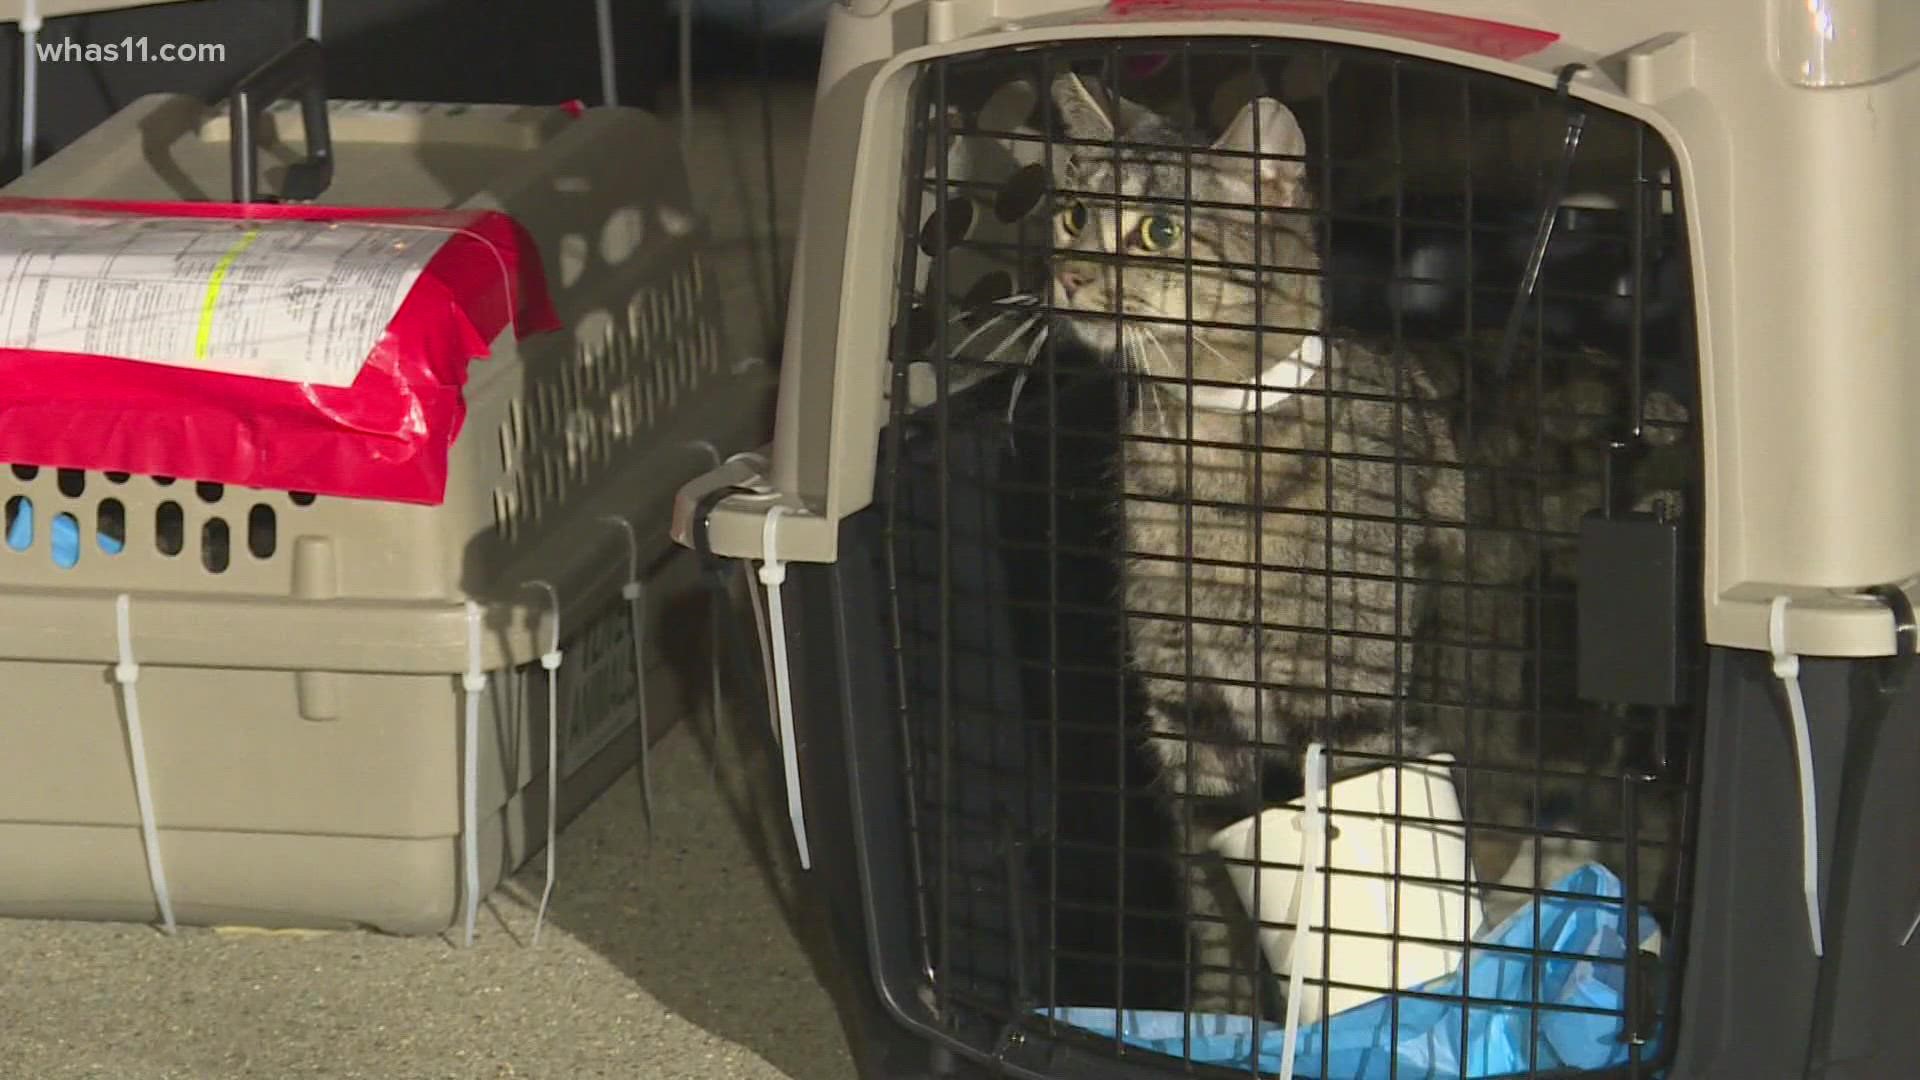 More than a hundred homeless cats from Western Kentucky are now safe in shelters in Massachusetts.